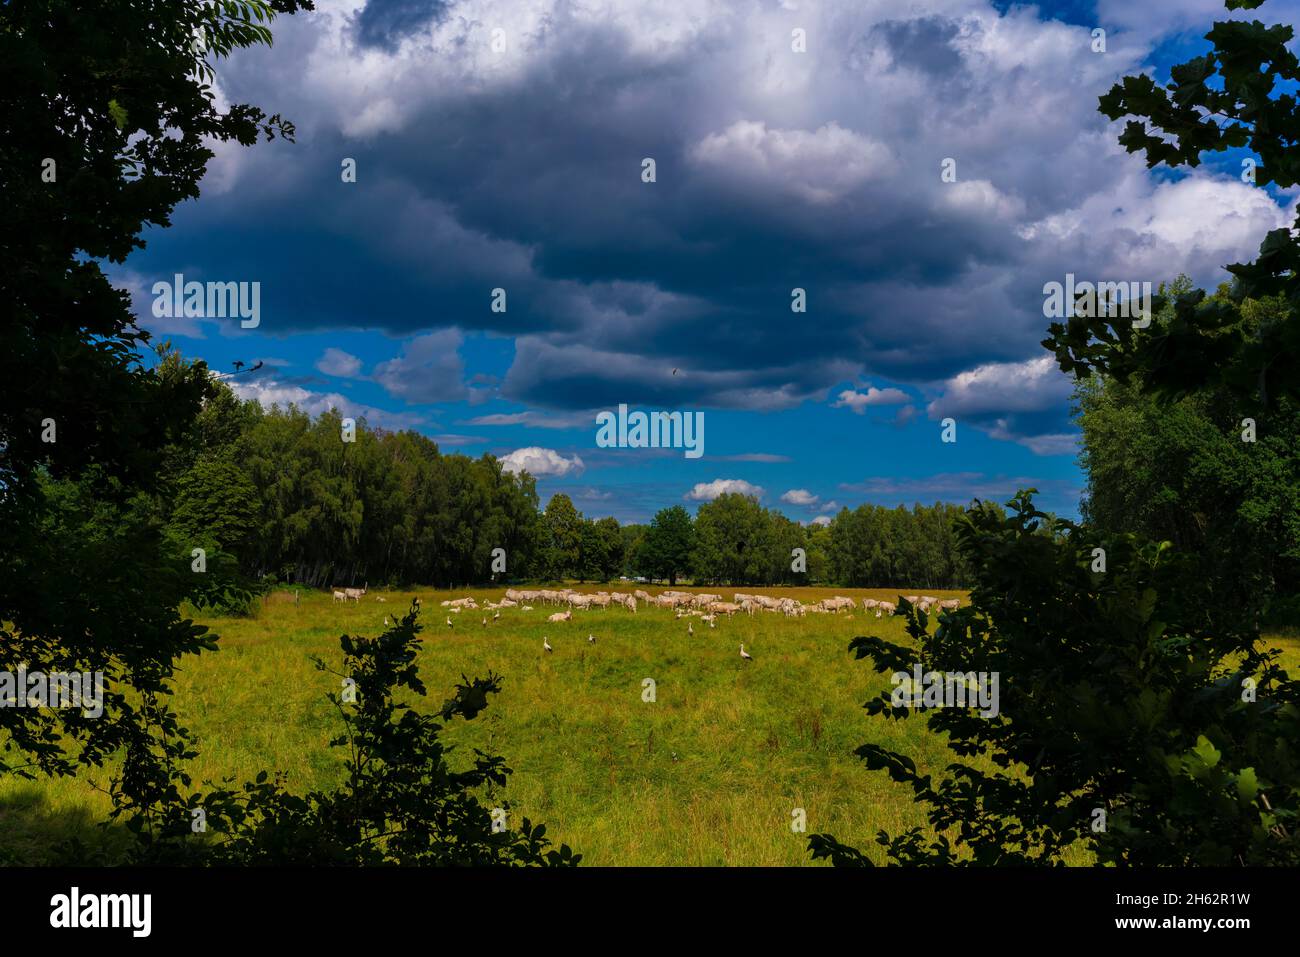 green meadow with cows and storks,thick rain clouds and birds in the sky Stock Photo